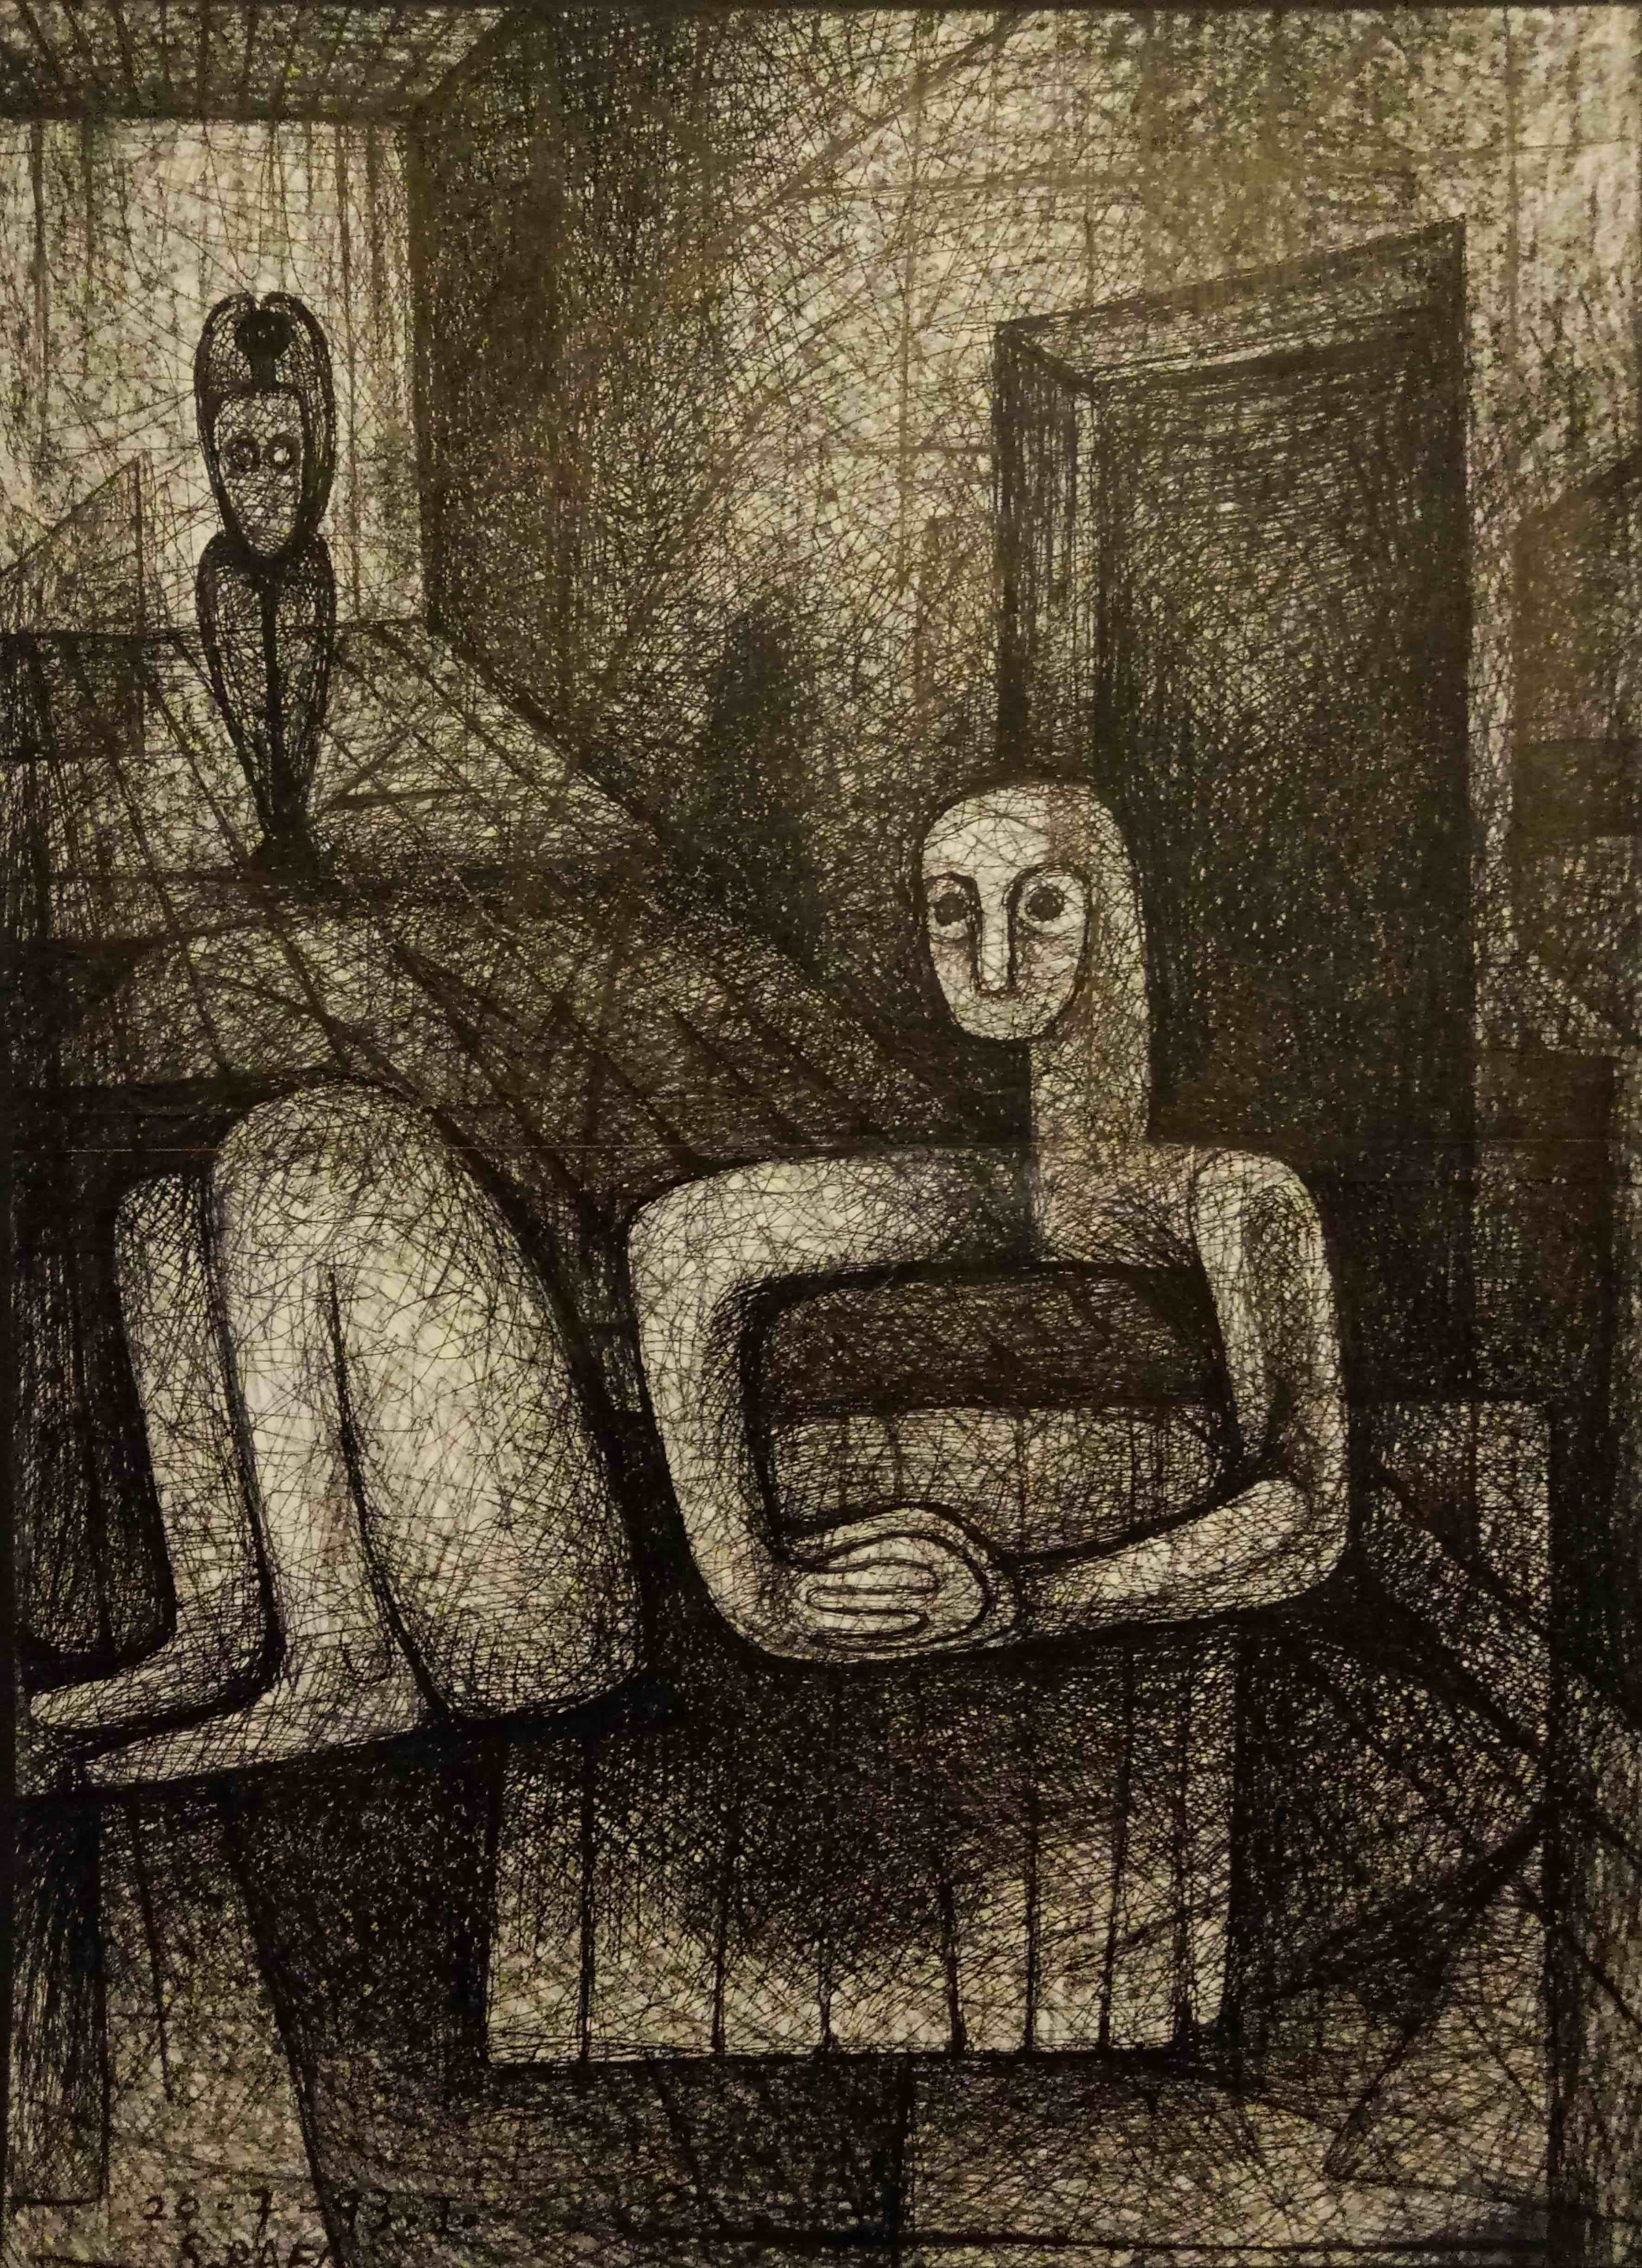 Untitled, 1993. Pen and pencil on carton, 57X42cm